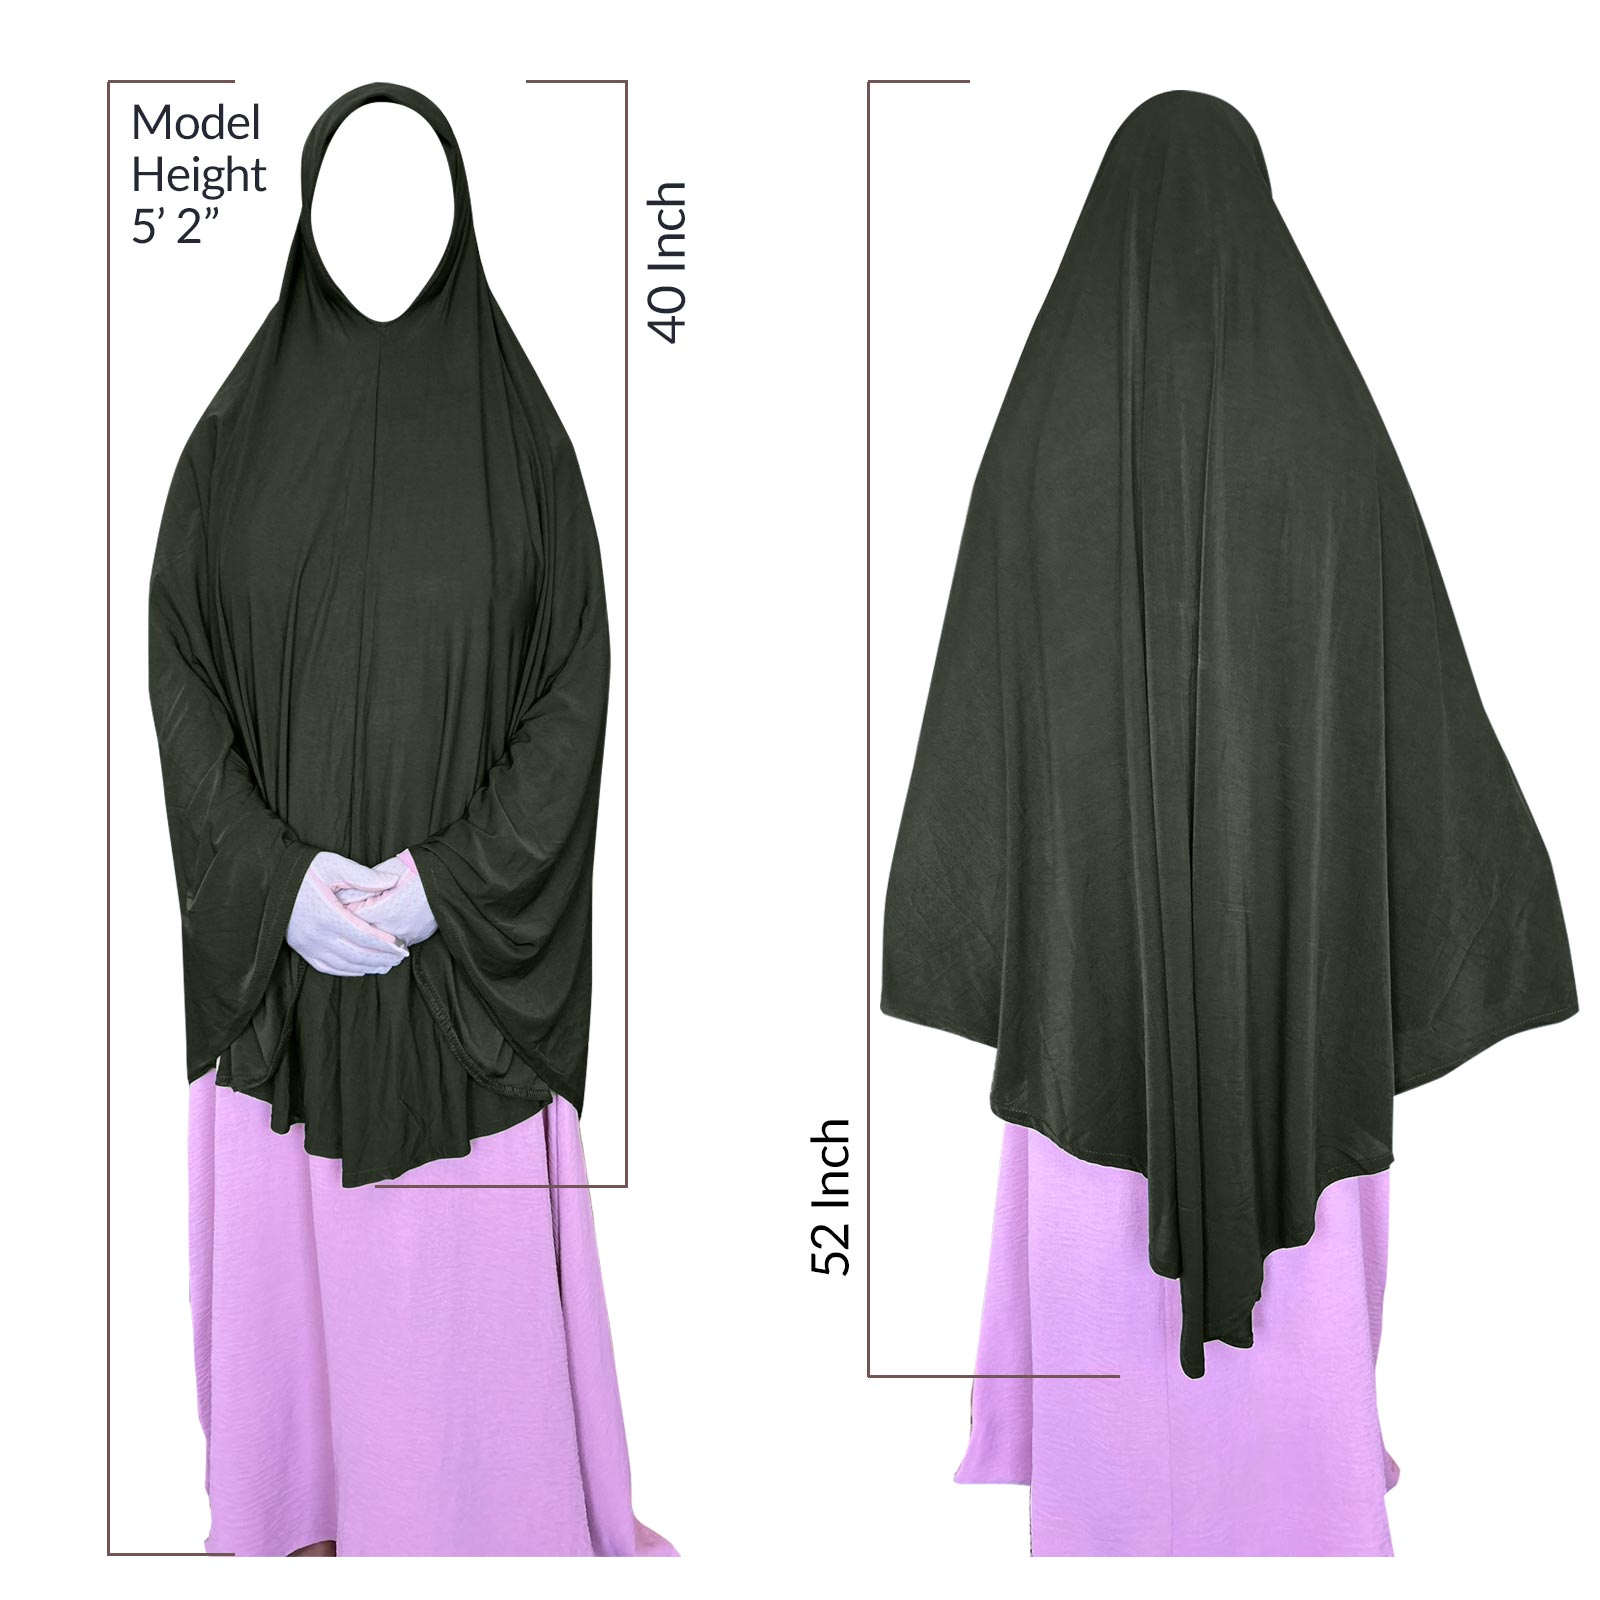 prayer hijab measures 48-in long on the front, 52-in long on the back